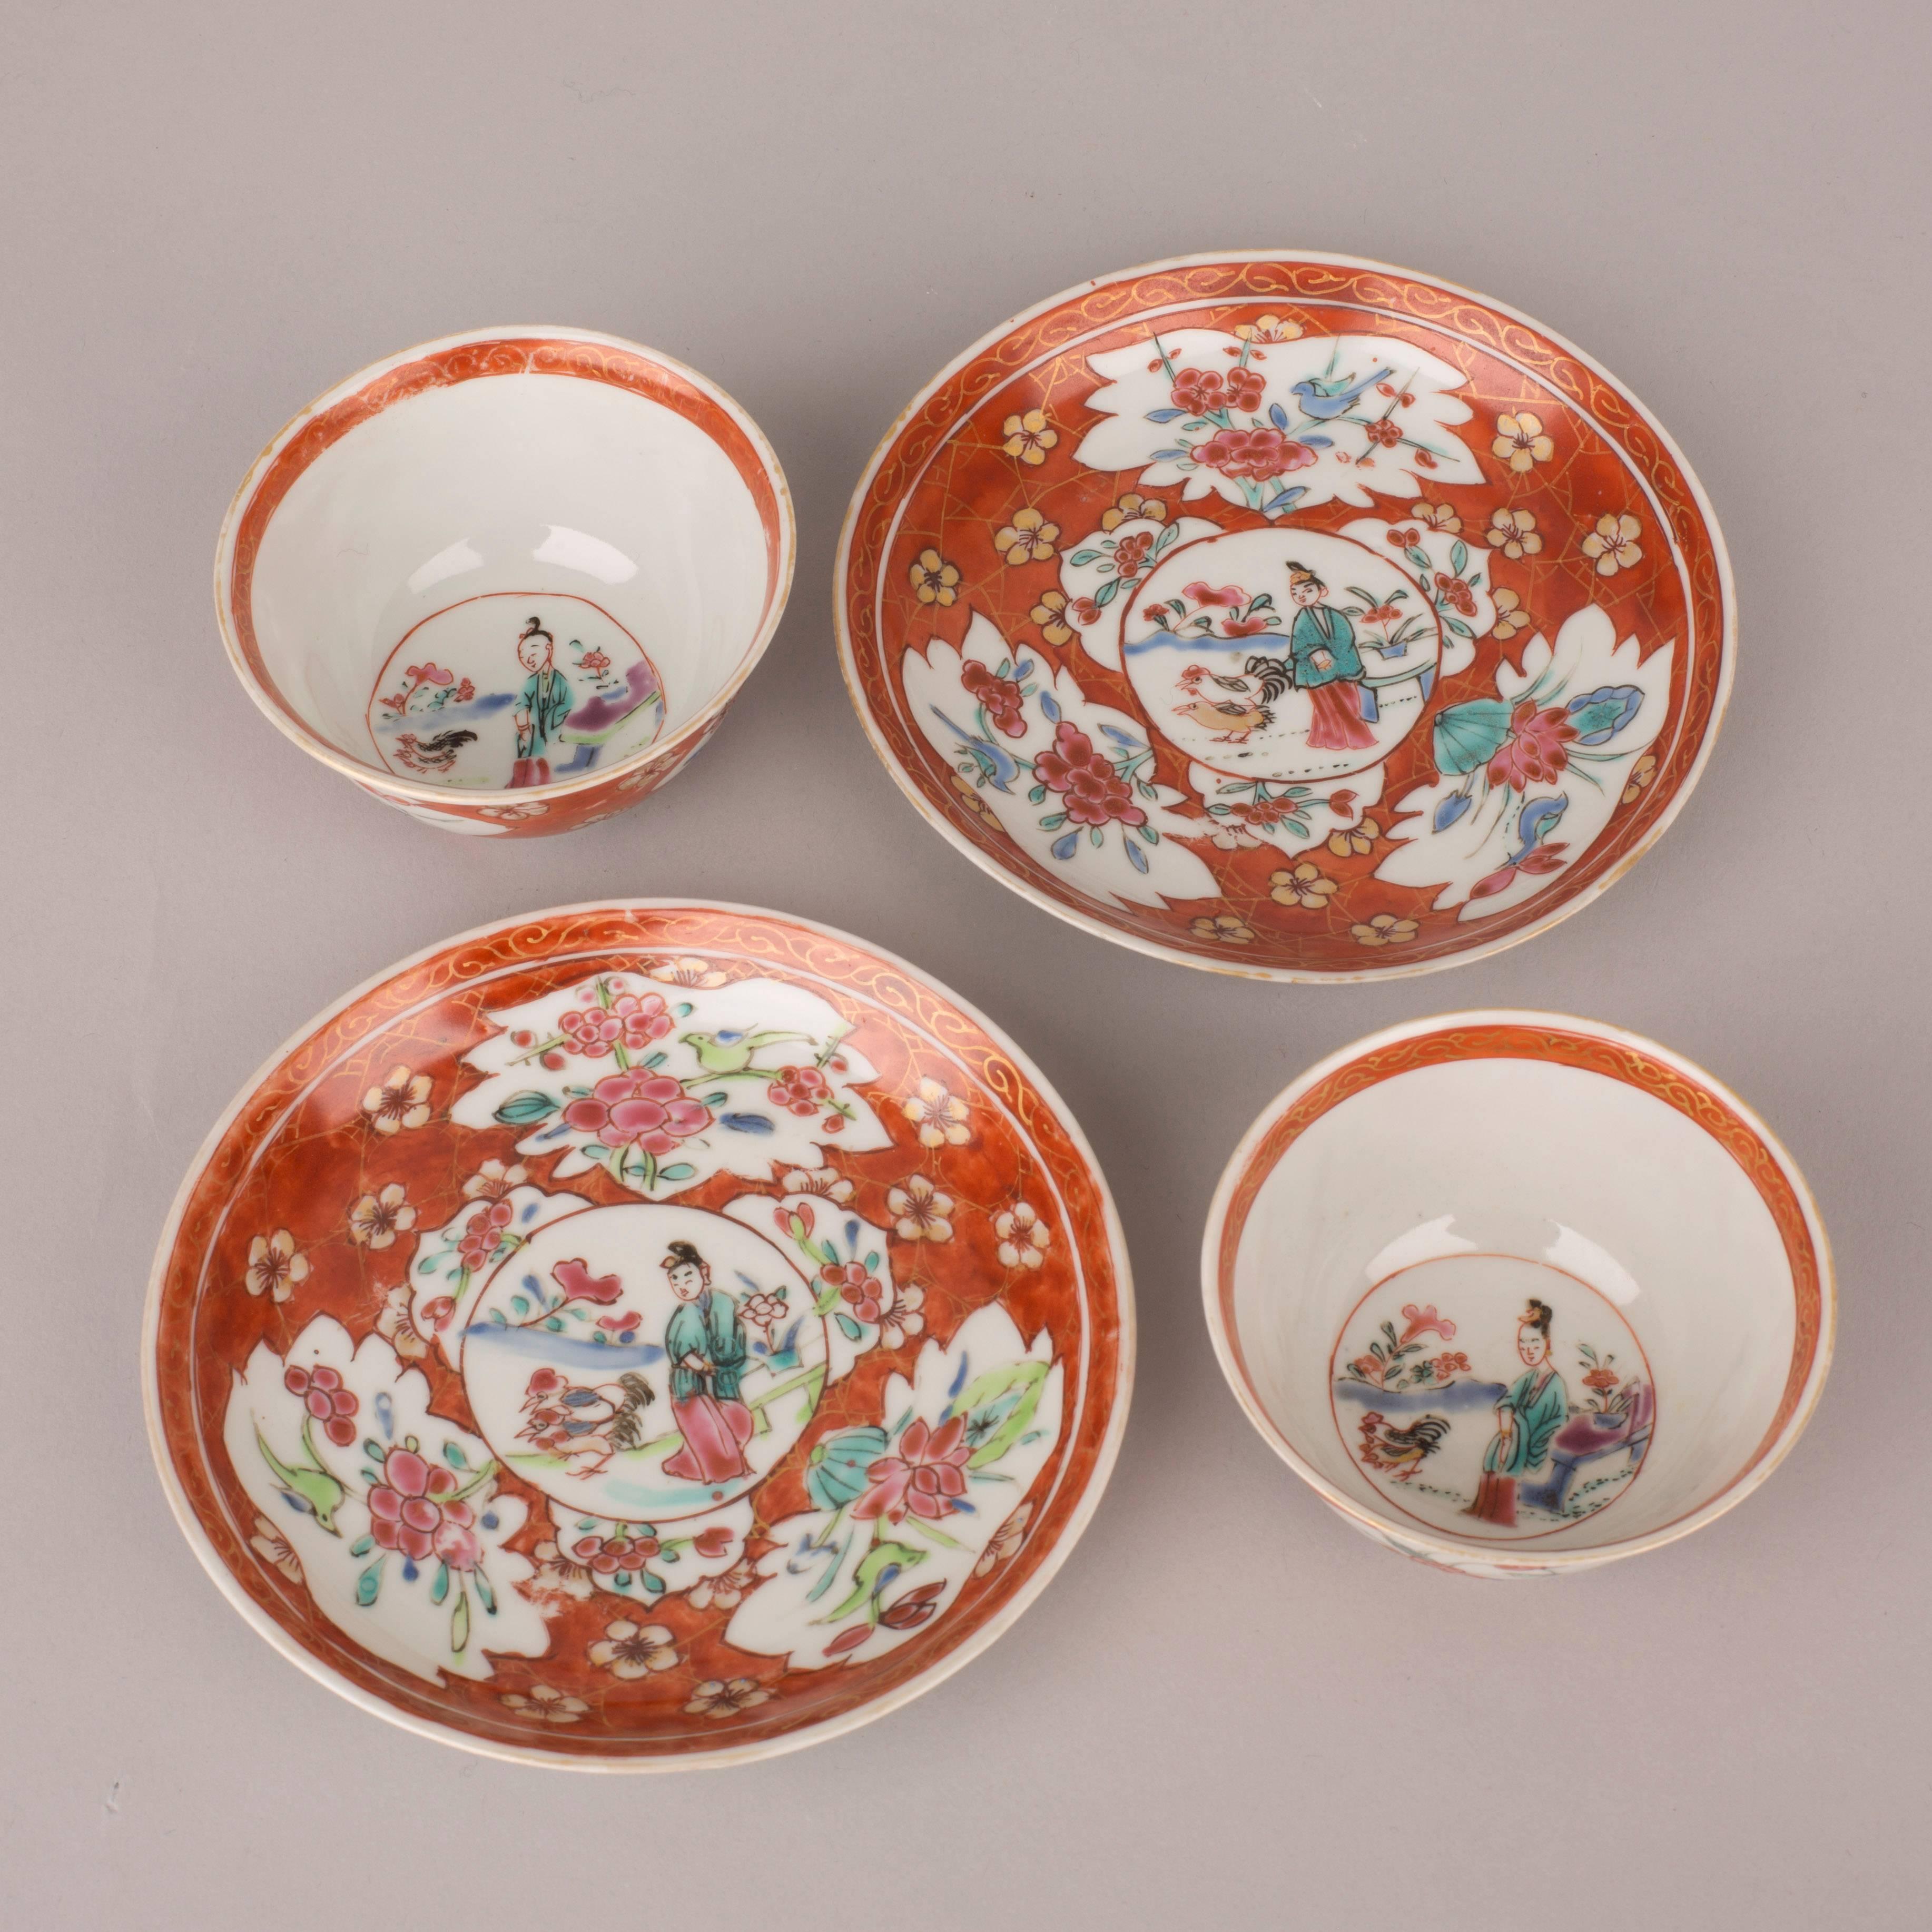 Pair of Chinese porcelain famille rose cups and saucers. The saucer painted with a central medallion of a lady with two chickens beside a flowering plant. River and flowers in the distance. Medallion surrounded by copper red and gilt cracked ice